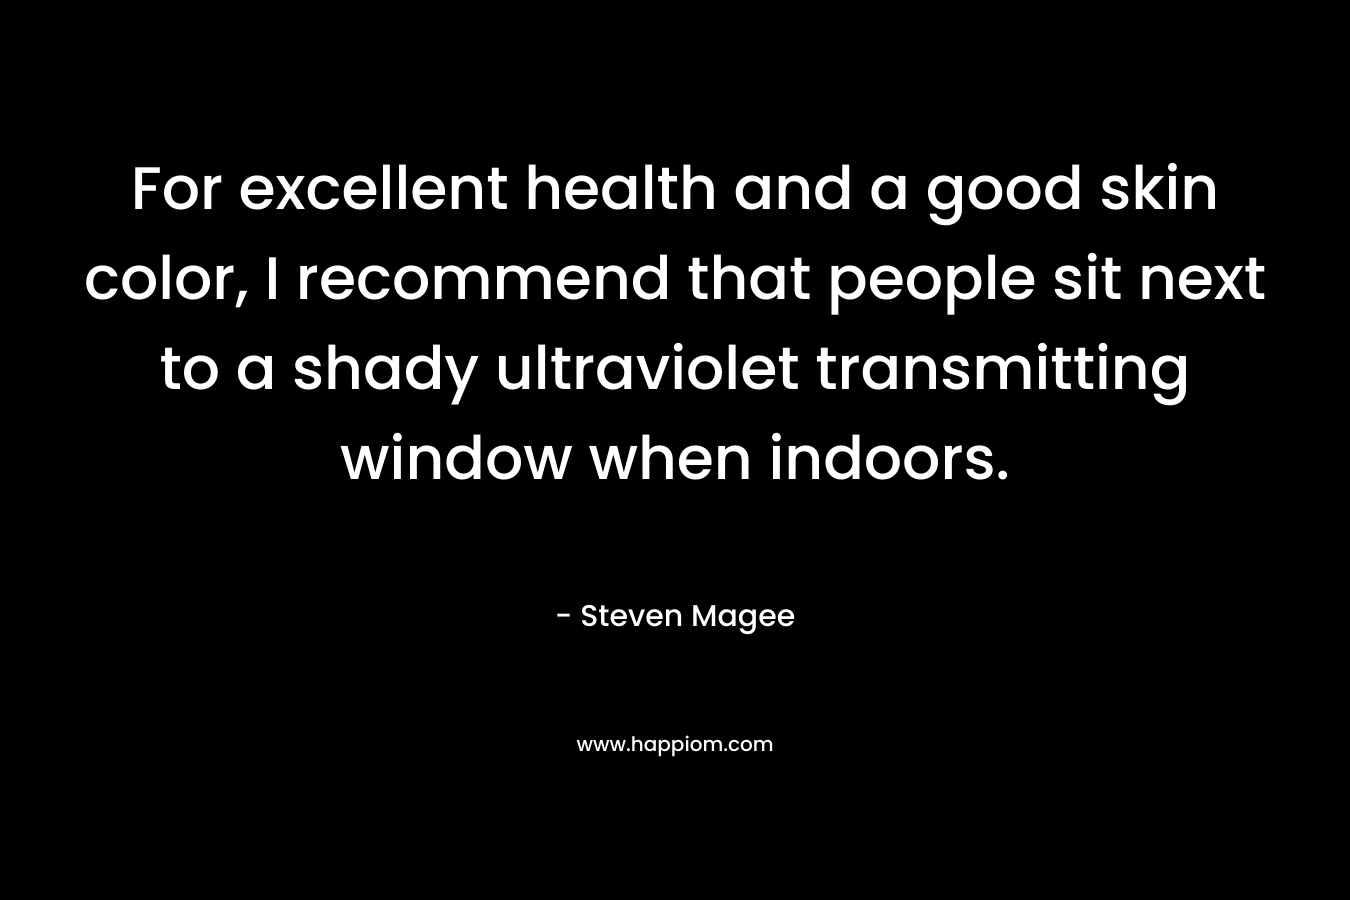 For excellent health and a good skin color, I recommend that people sit next to a shady ultraviolet transmitting window when indoors. – Steven Magee